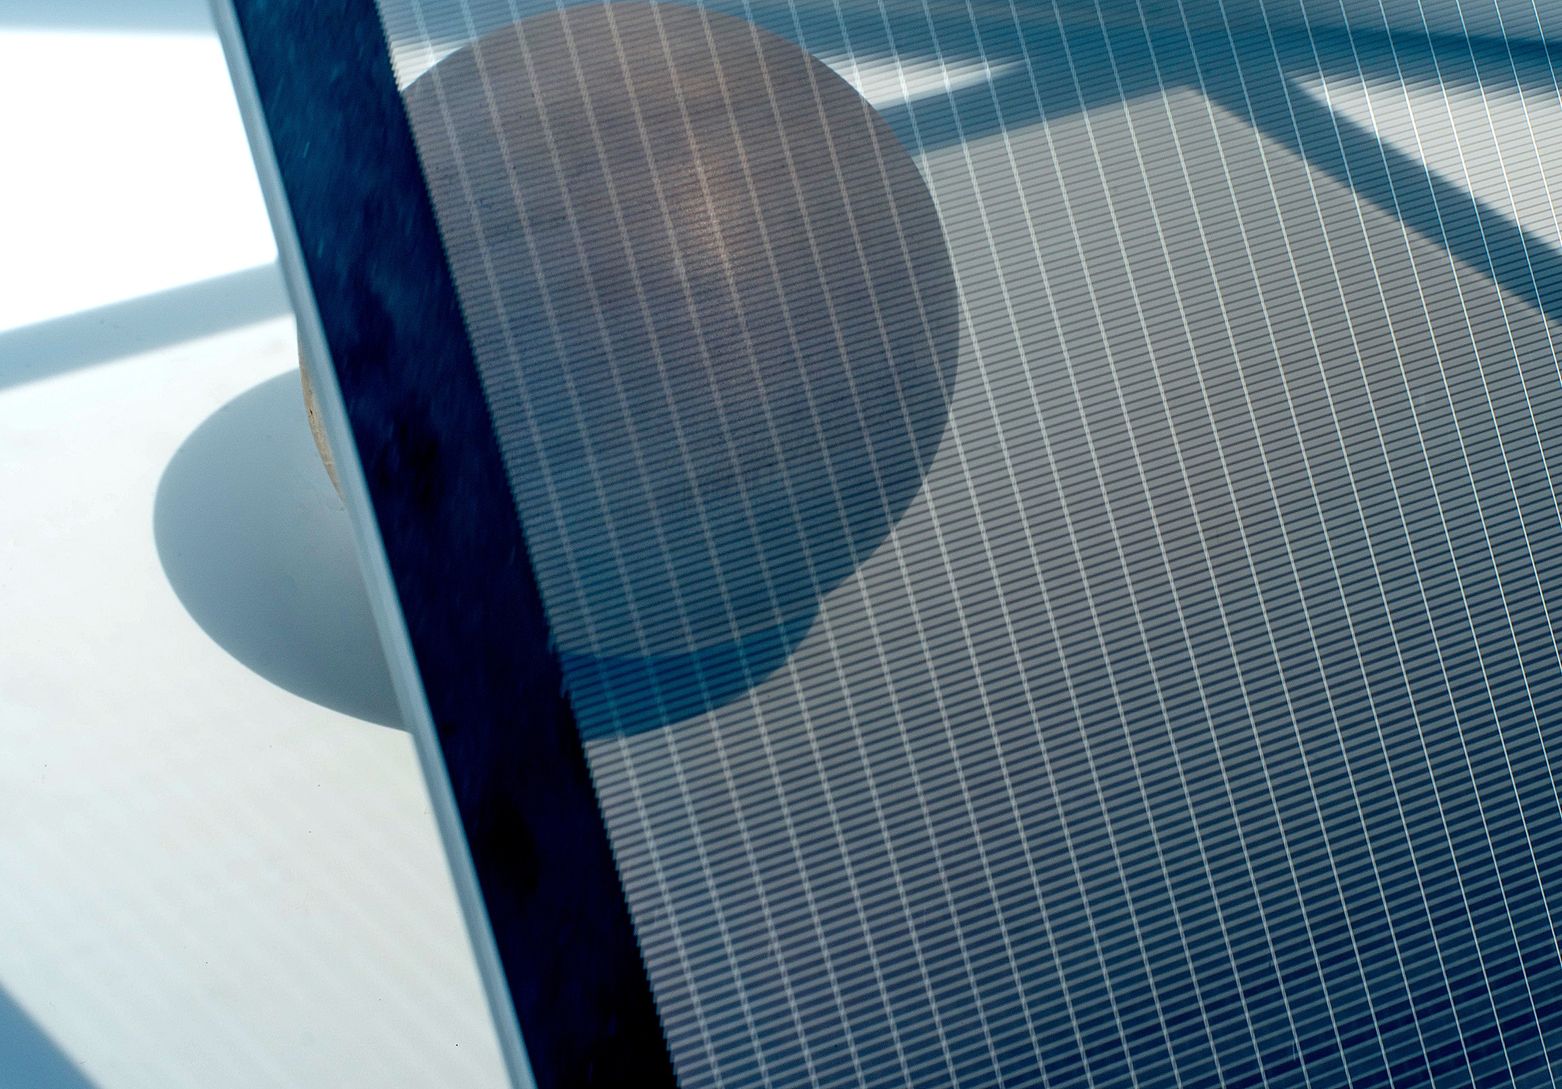 The transparency of a solar panel is highlighted by showing objects behind it, through it.